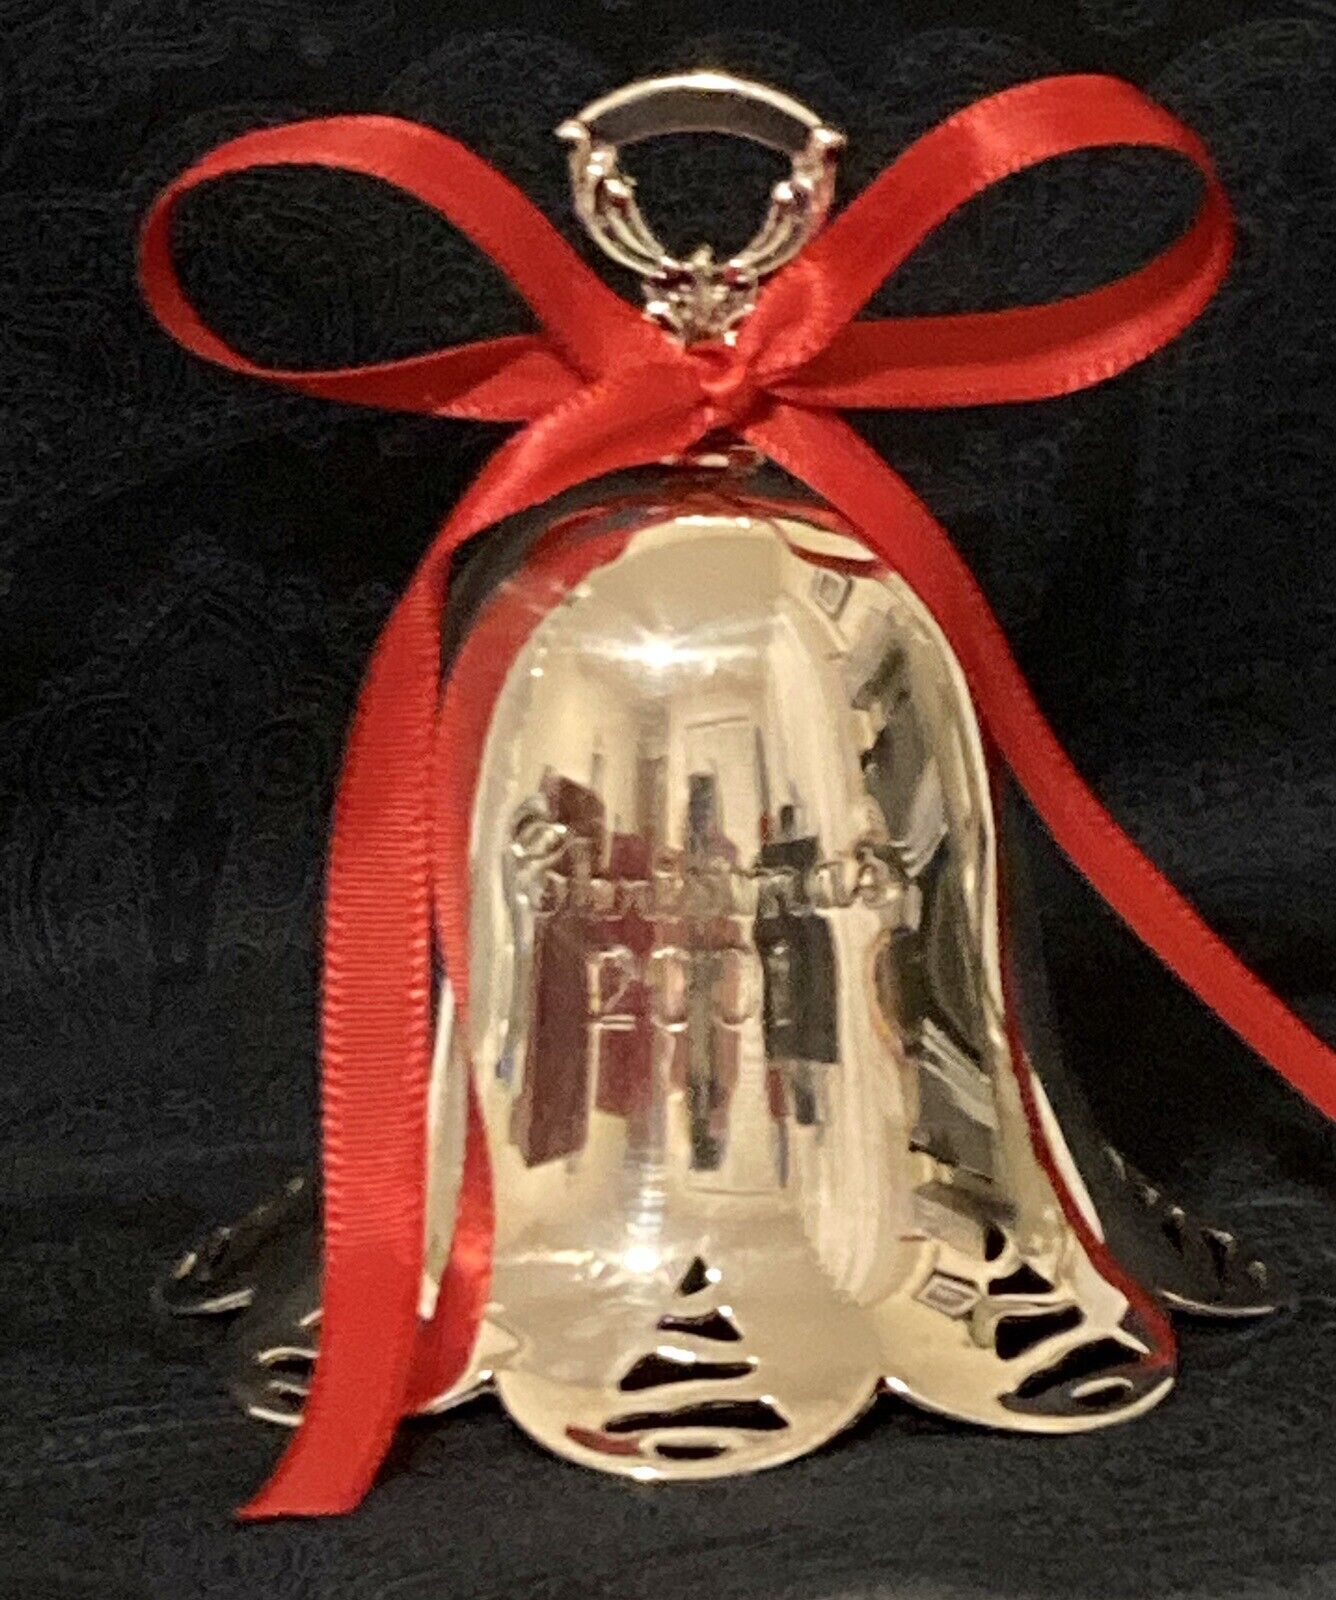 2001 Towle Silver Plate Christmas Bell Annual Ornament Pierced Tree Edge